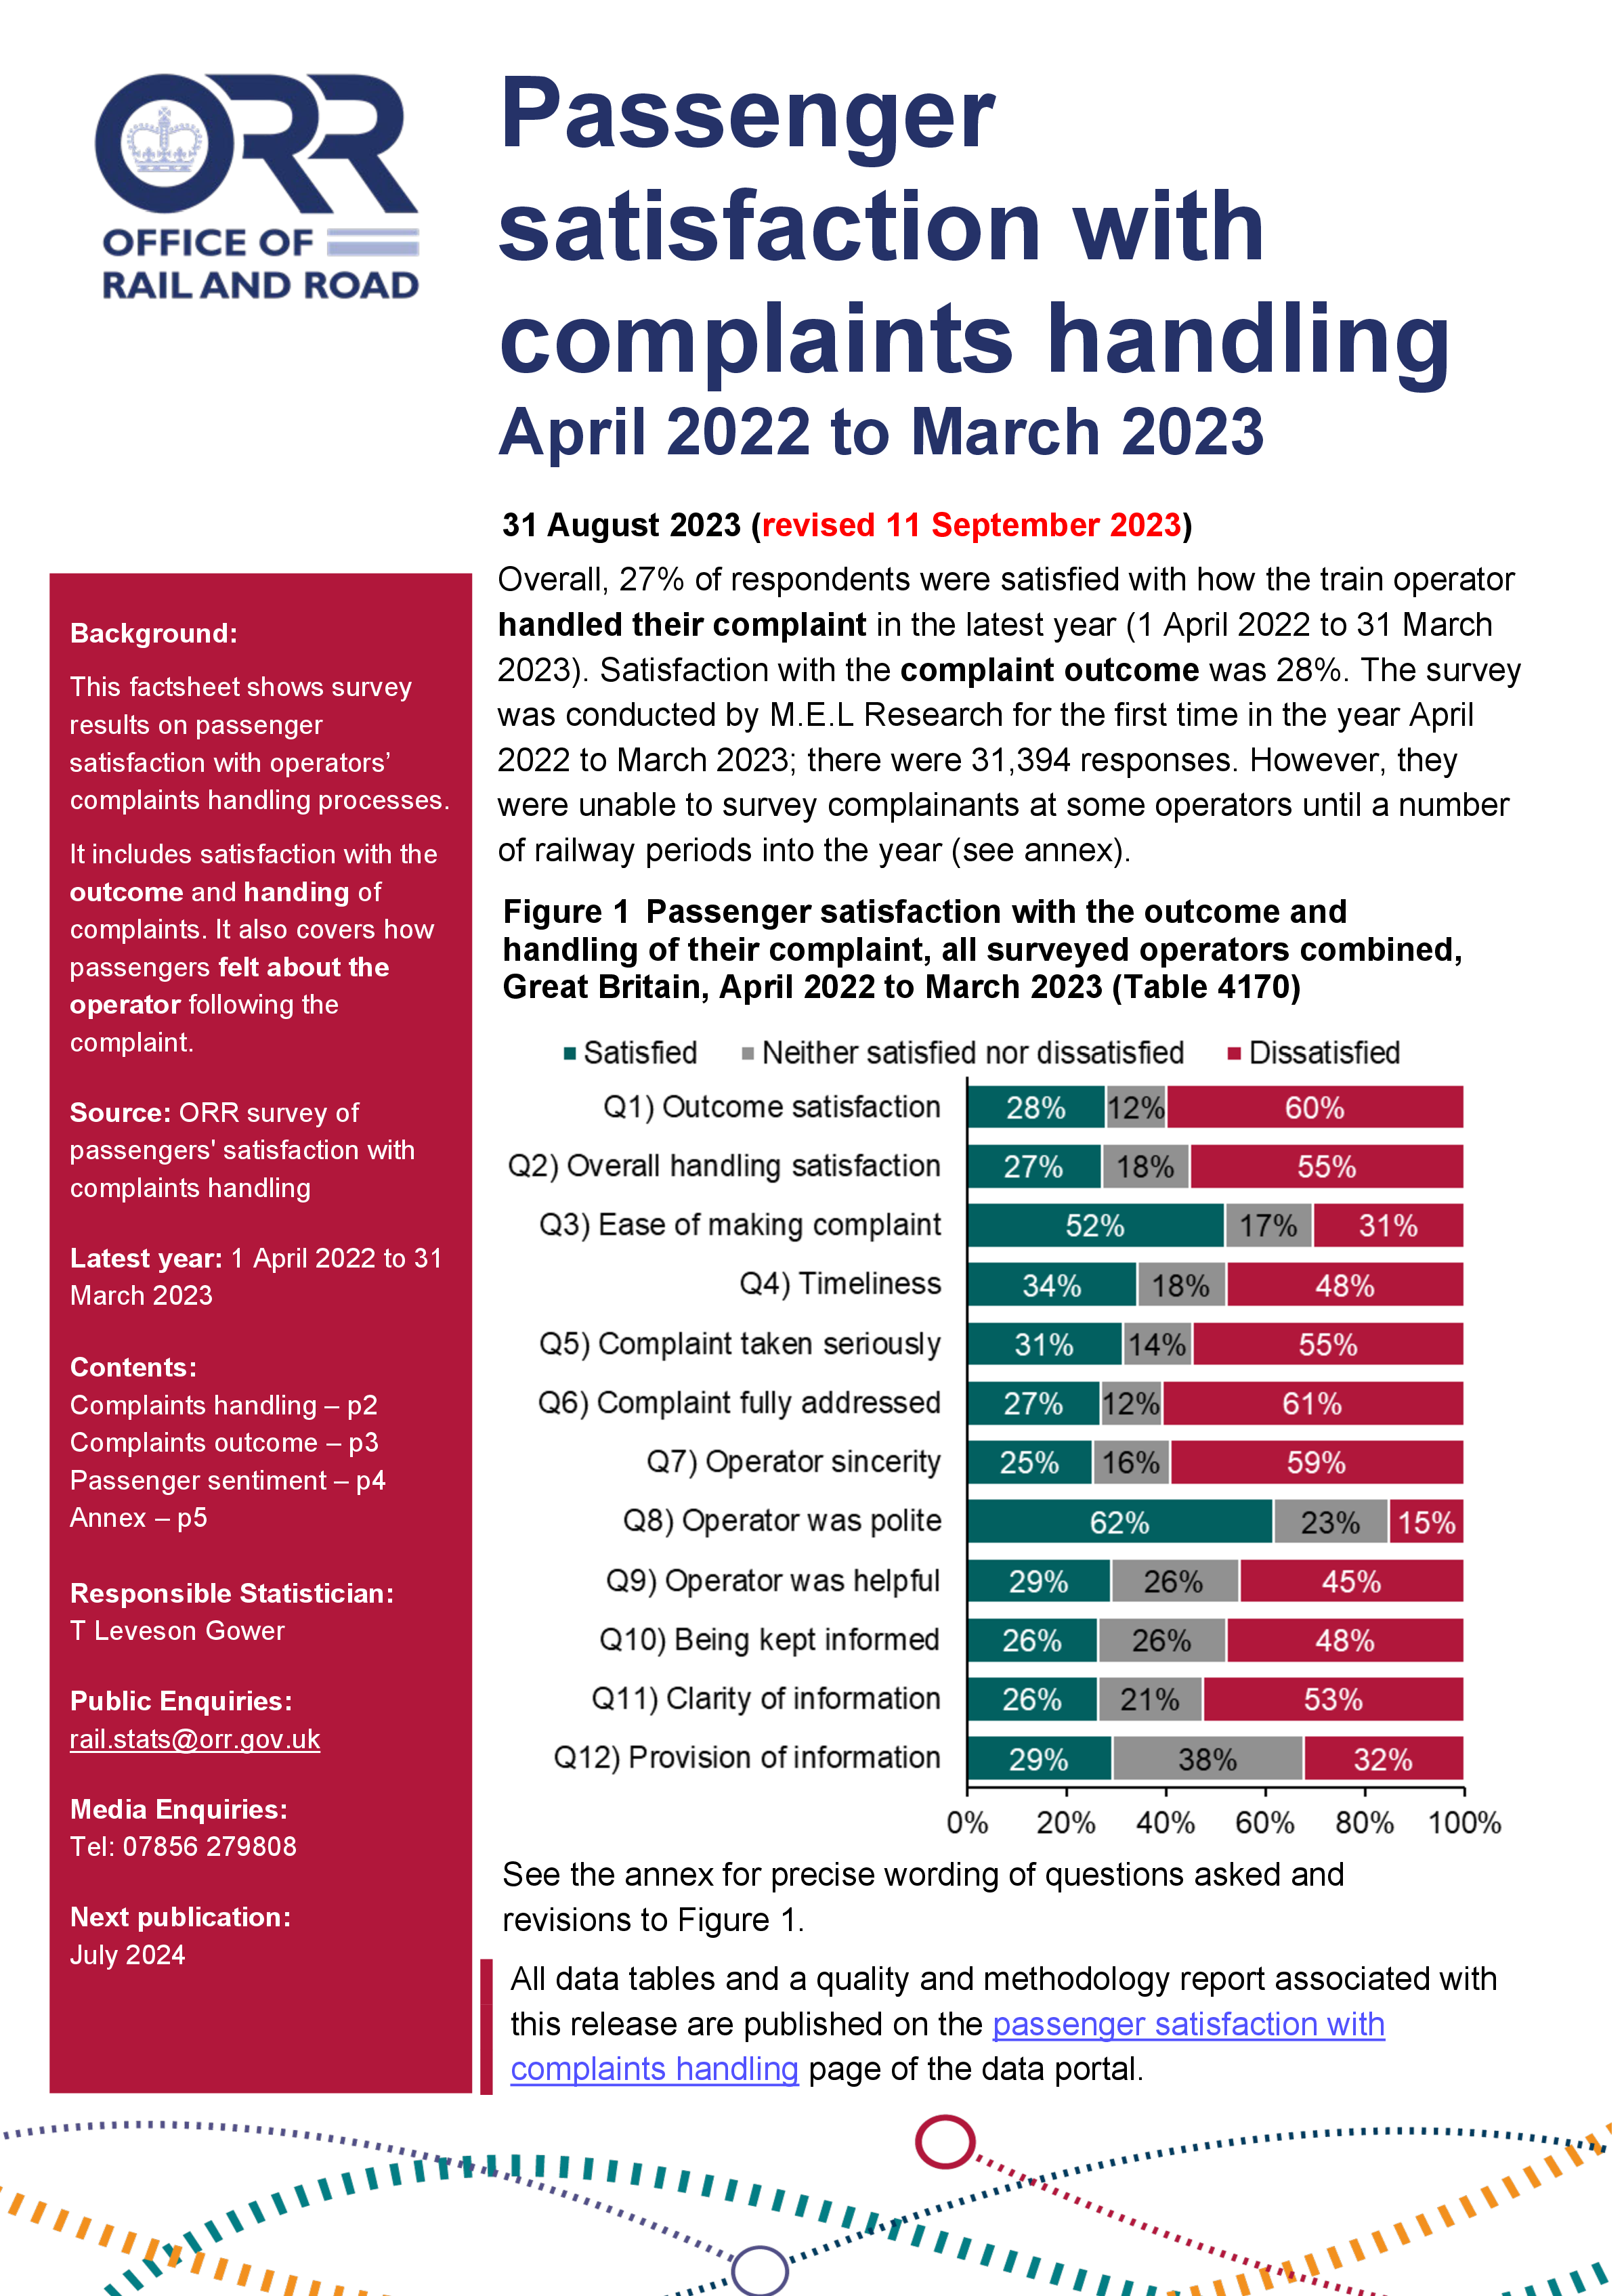 Passenger satisfaction with complaints handling, April 2022 to March 2023